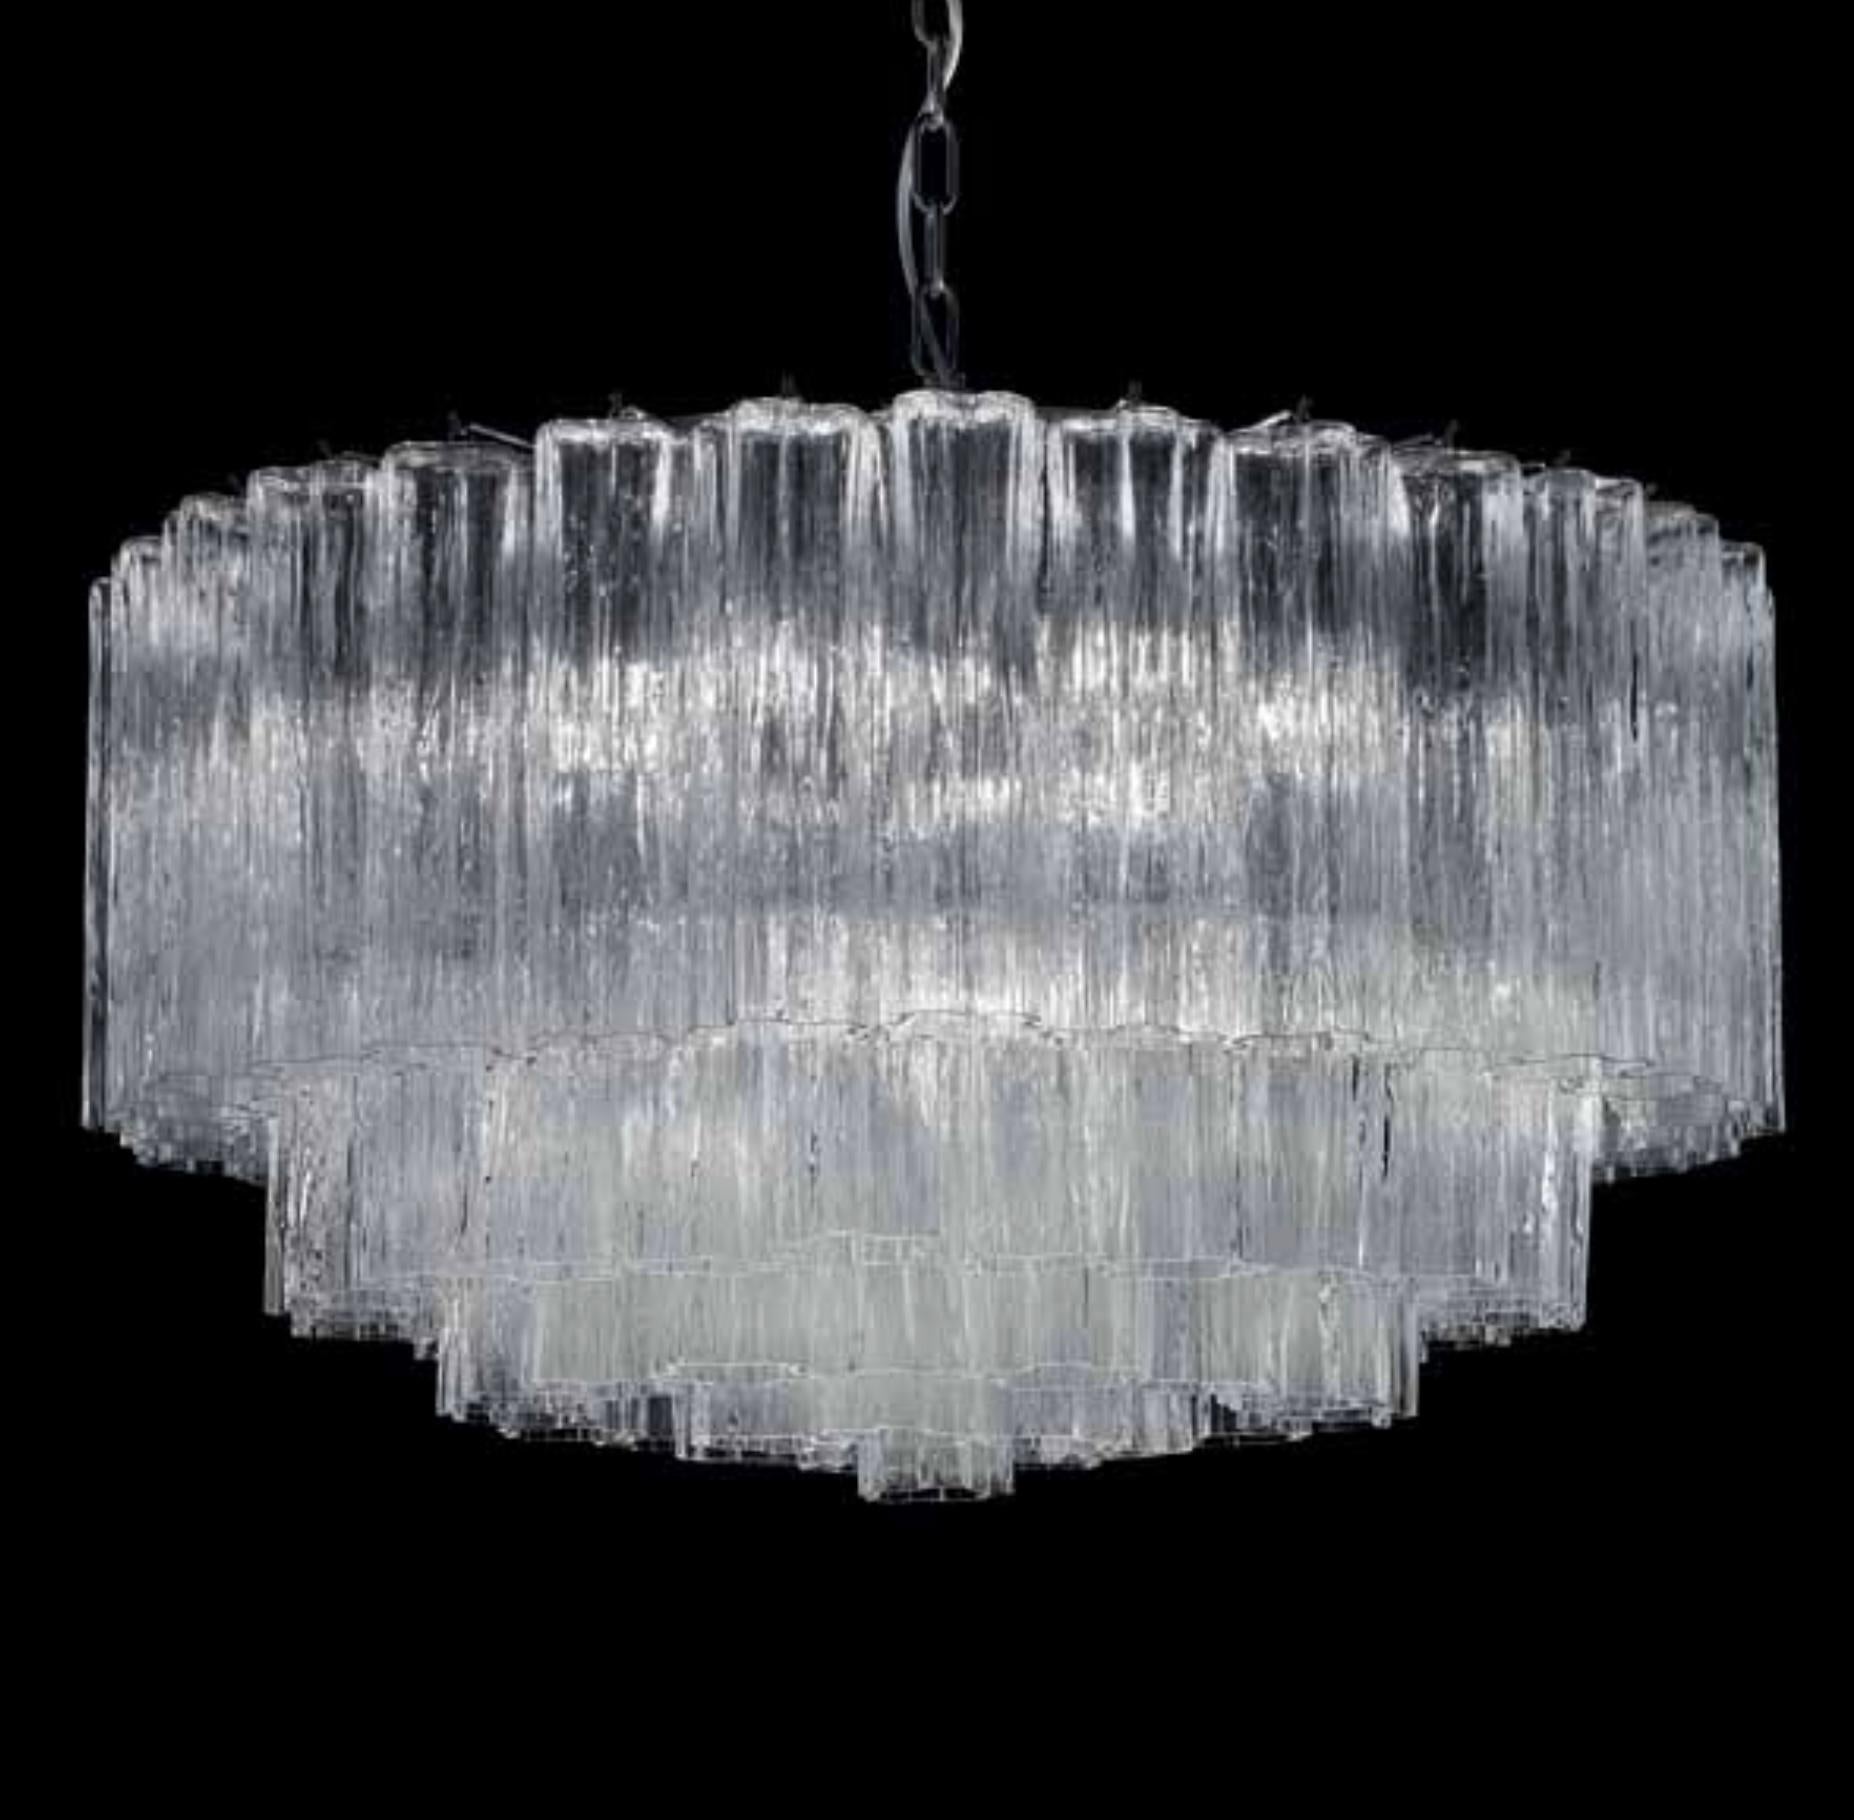 Italian chandelier with clear Murano tronchi glasses mounted on chrome finish metal frame / Made in Italy by Fabio Ltd
Measures: diameter 29.5 inches, height 16 inches plus chain and canopy 
6 lights / E26 or E27 type / max 60W each
Order only /